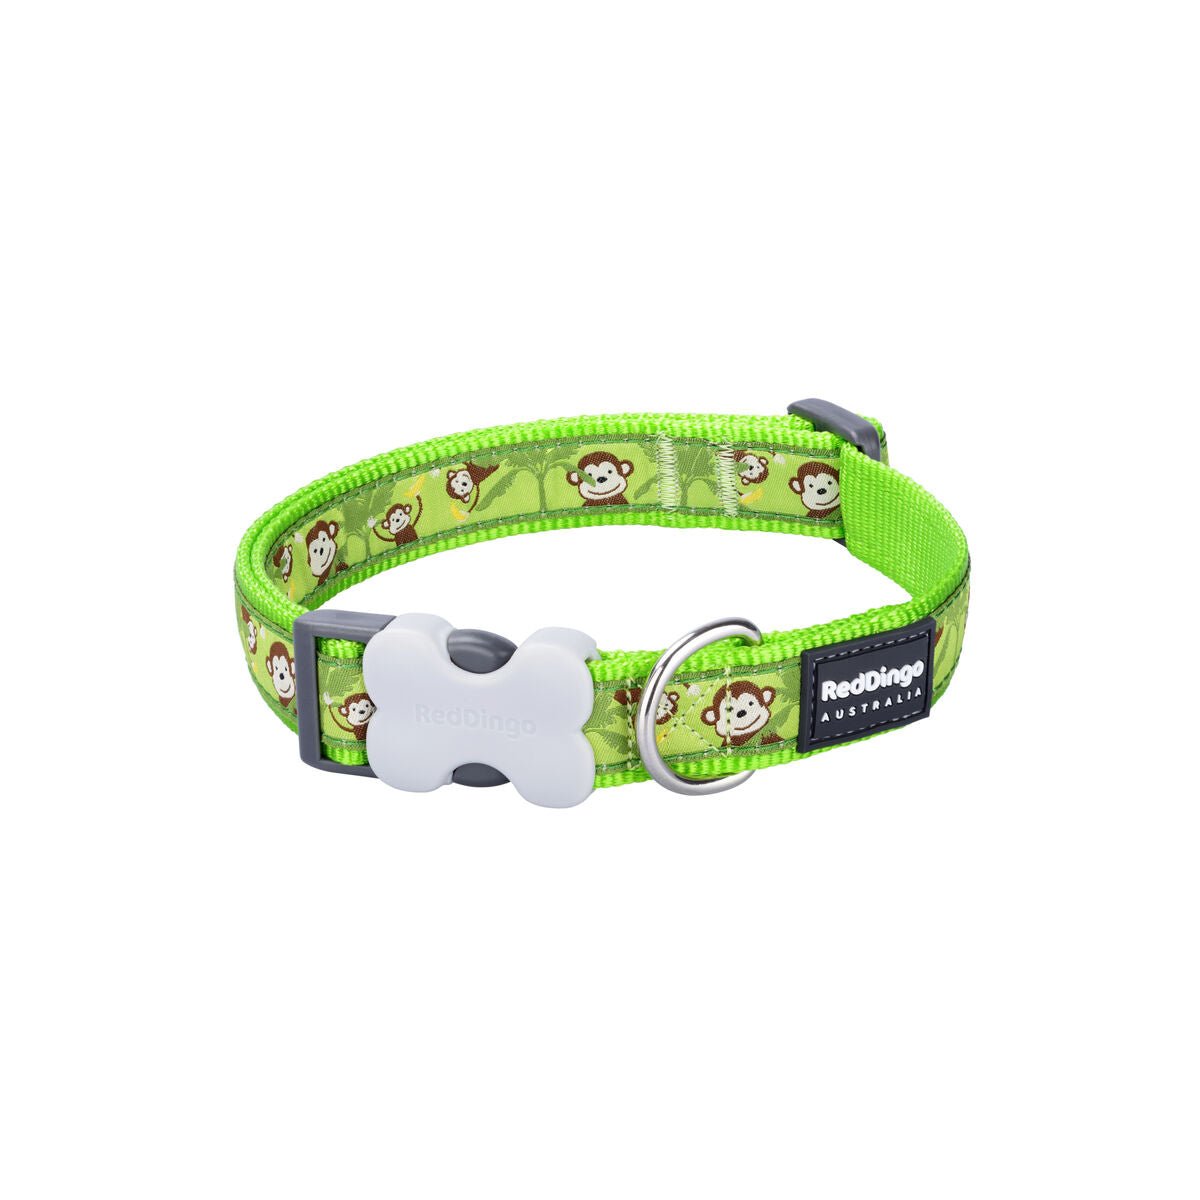 Hundhalsband Red Dingo STYLE MONKEY LIME GREEN 15 mm x 24-36 cm